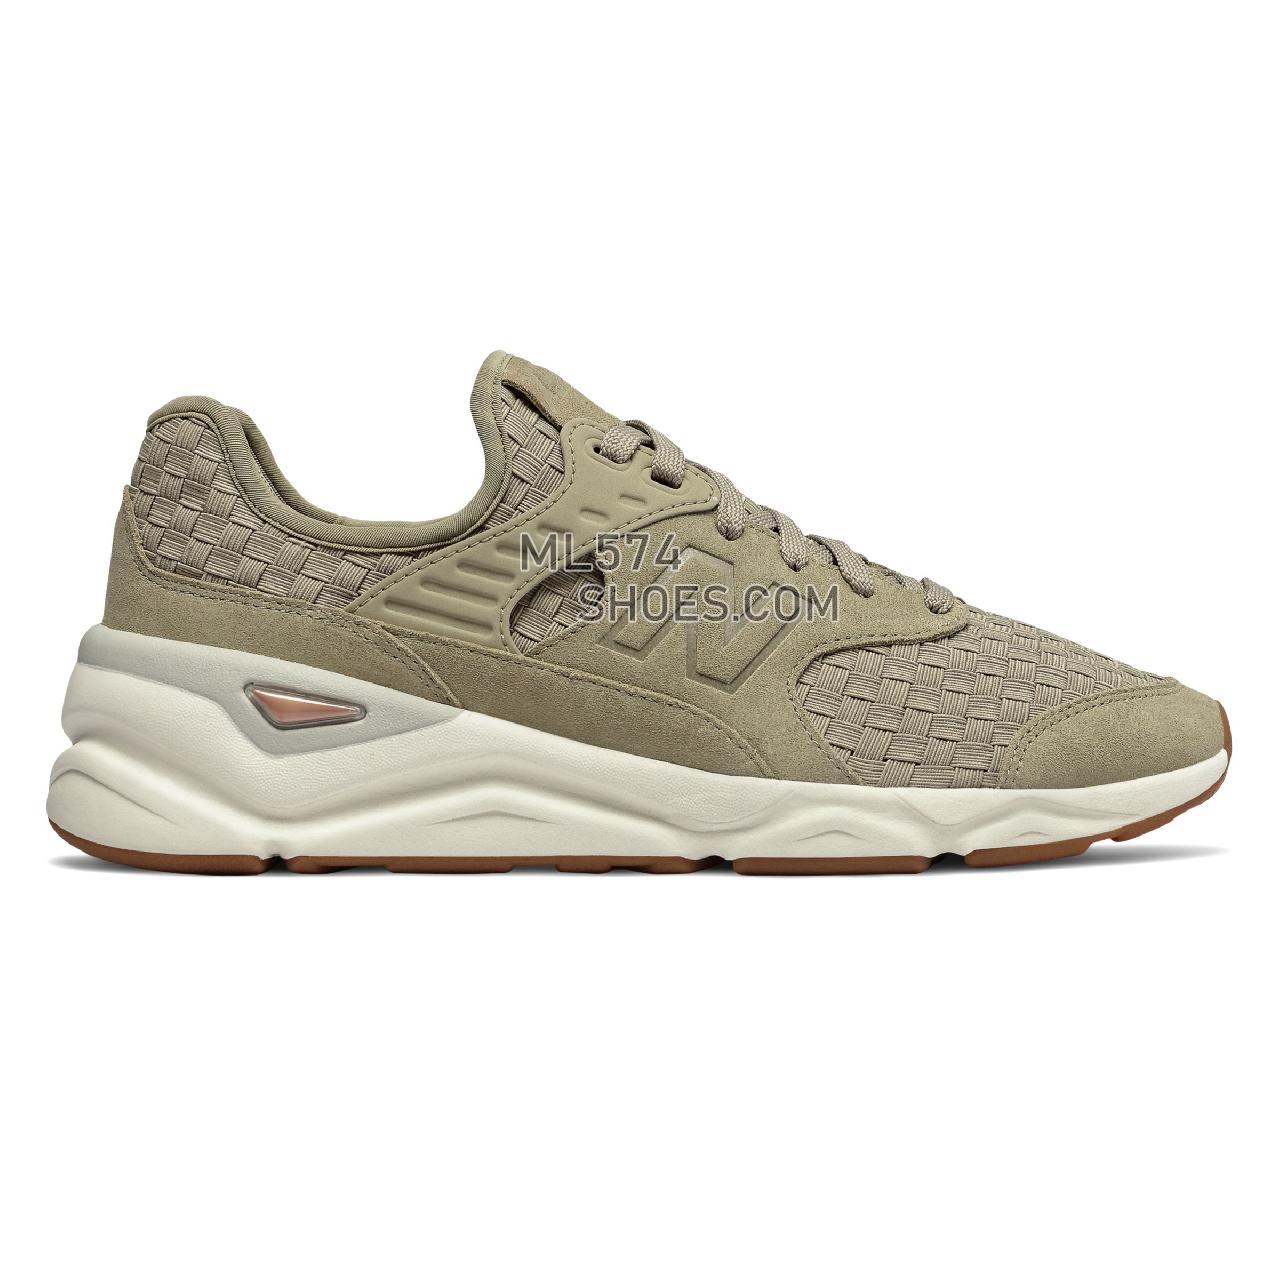 New Balance X-90 - Men's Sport Style Sneakers - Trench with Sea Salt - MSX90WCM